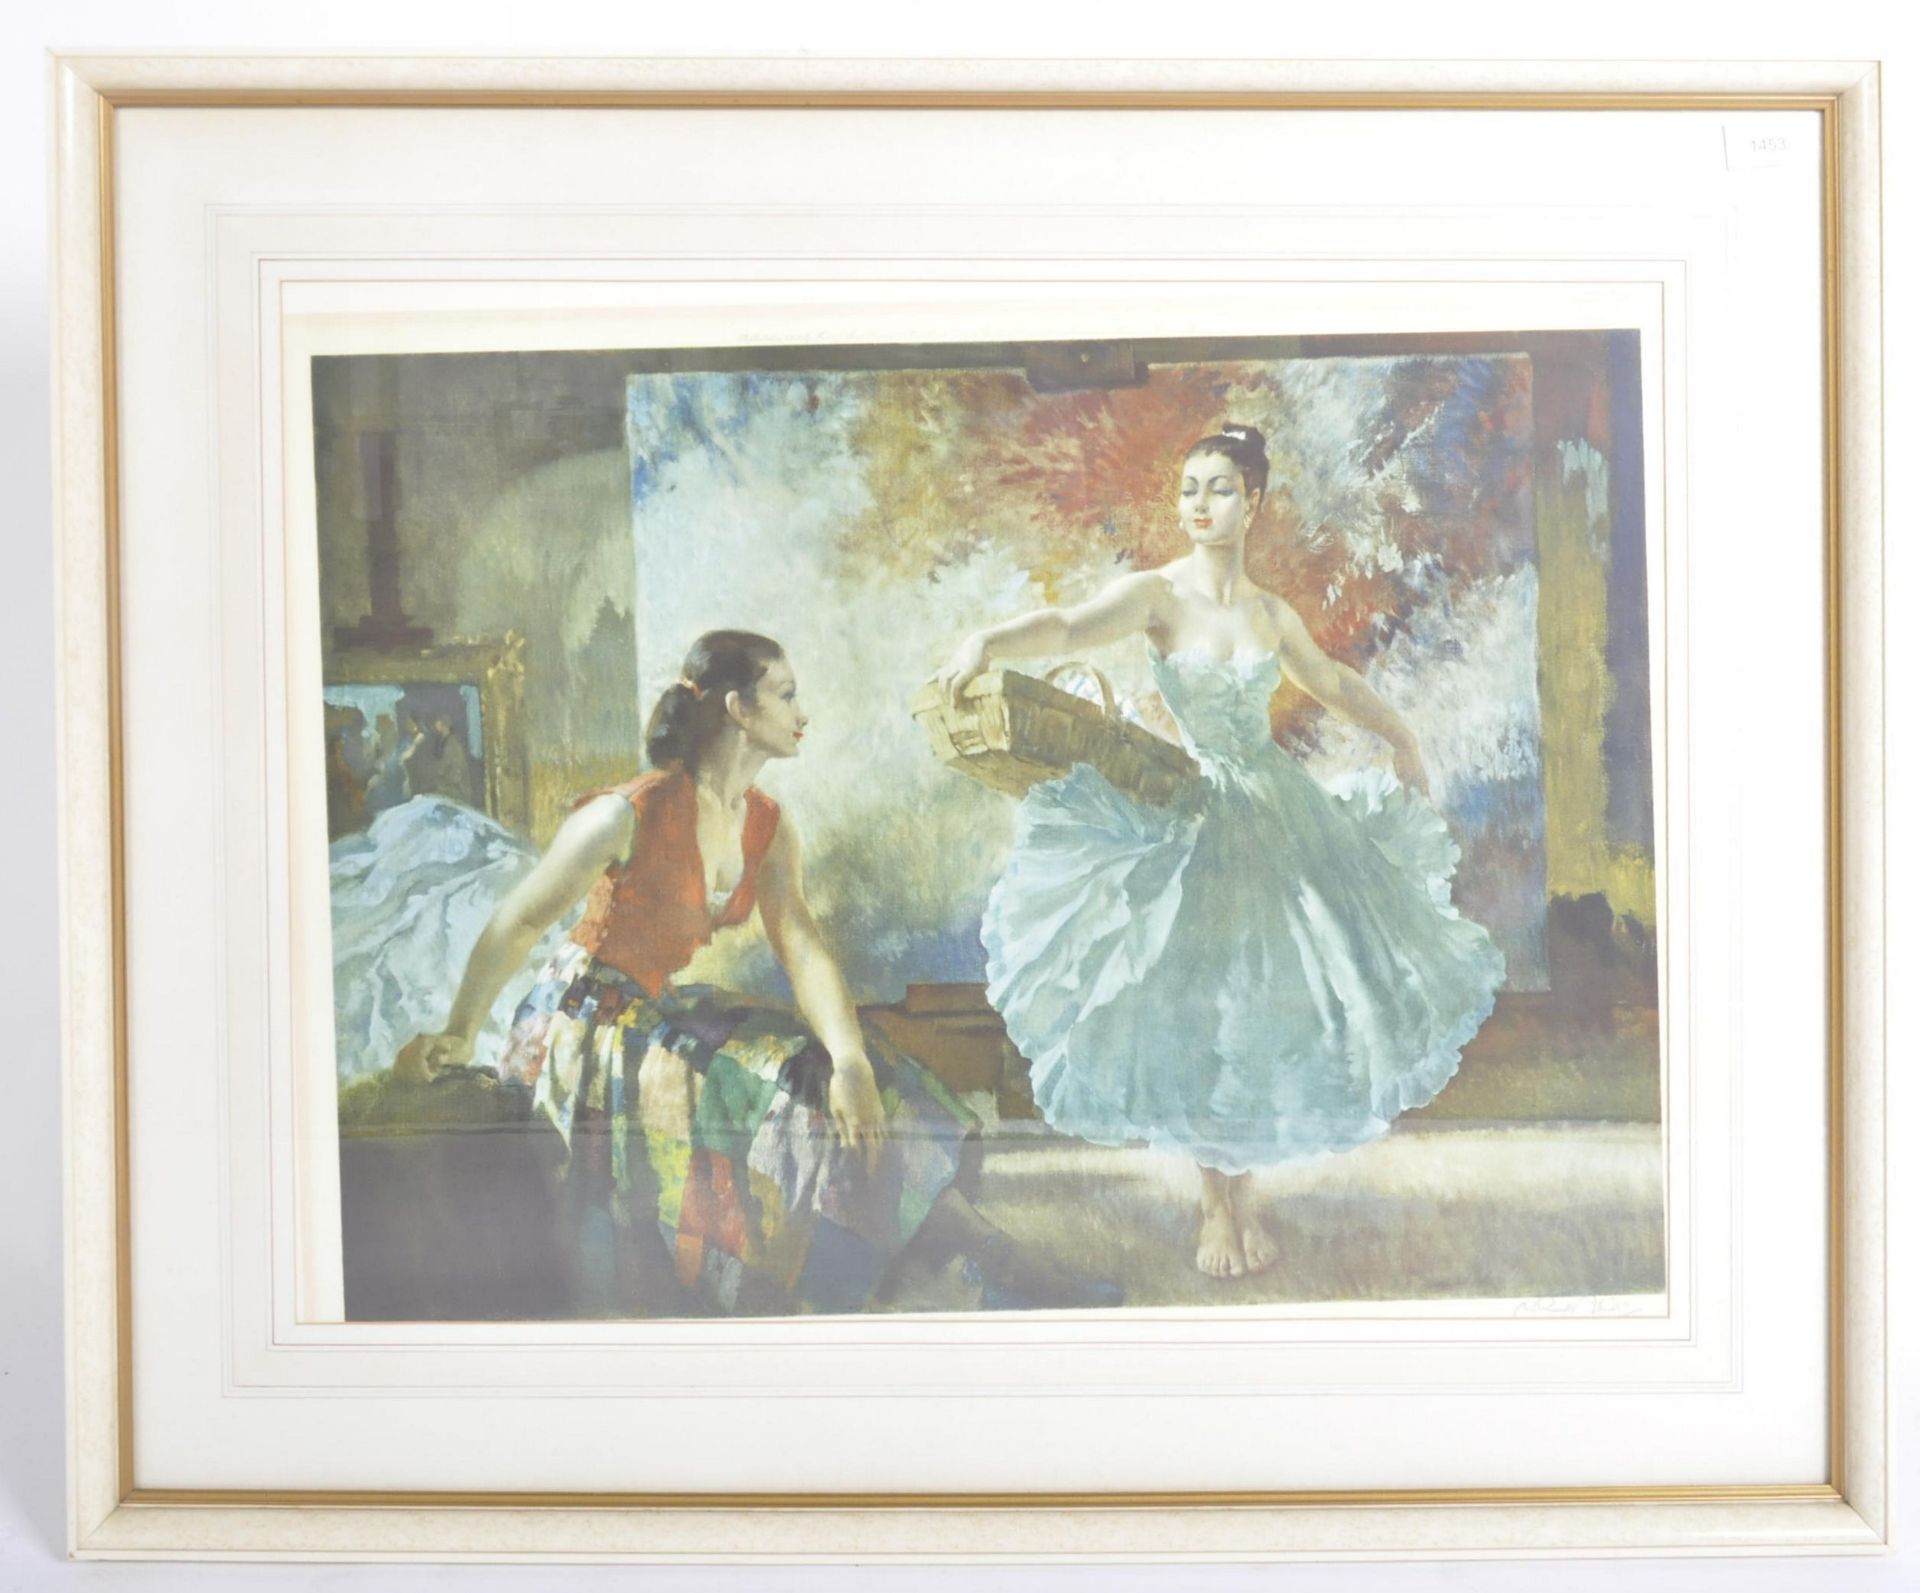 AFTER SIR WILLIAM RUSSELL FLINT - SIGNED PRINT